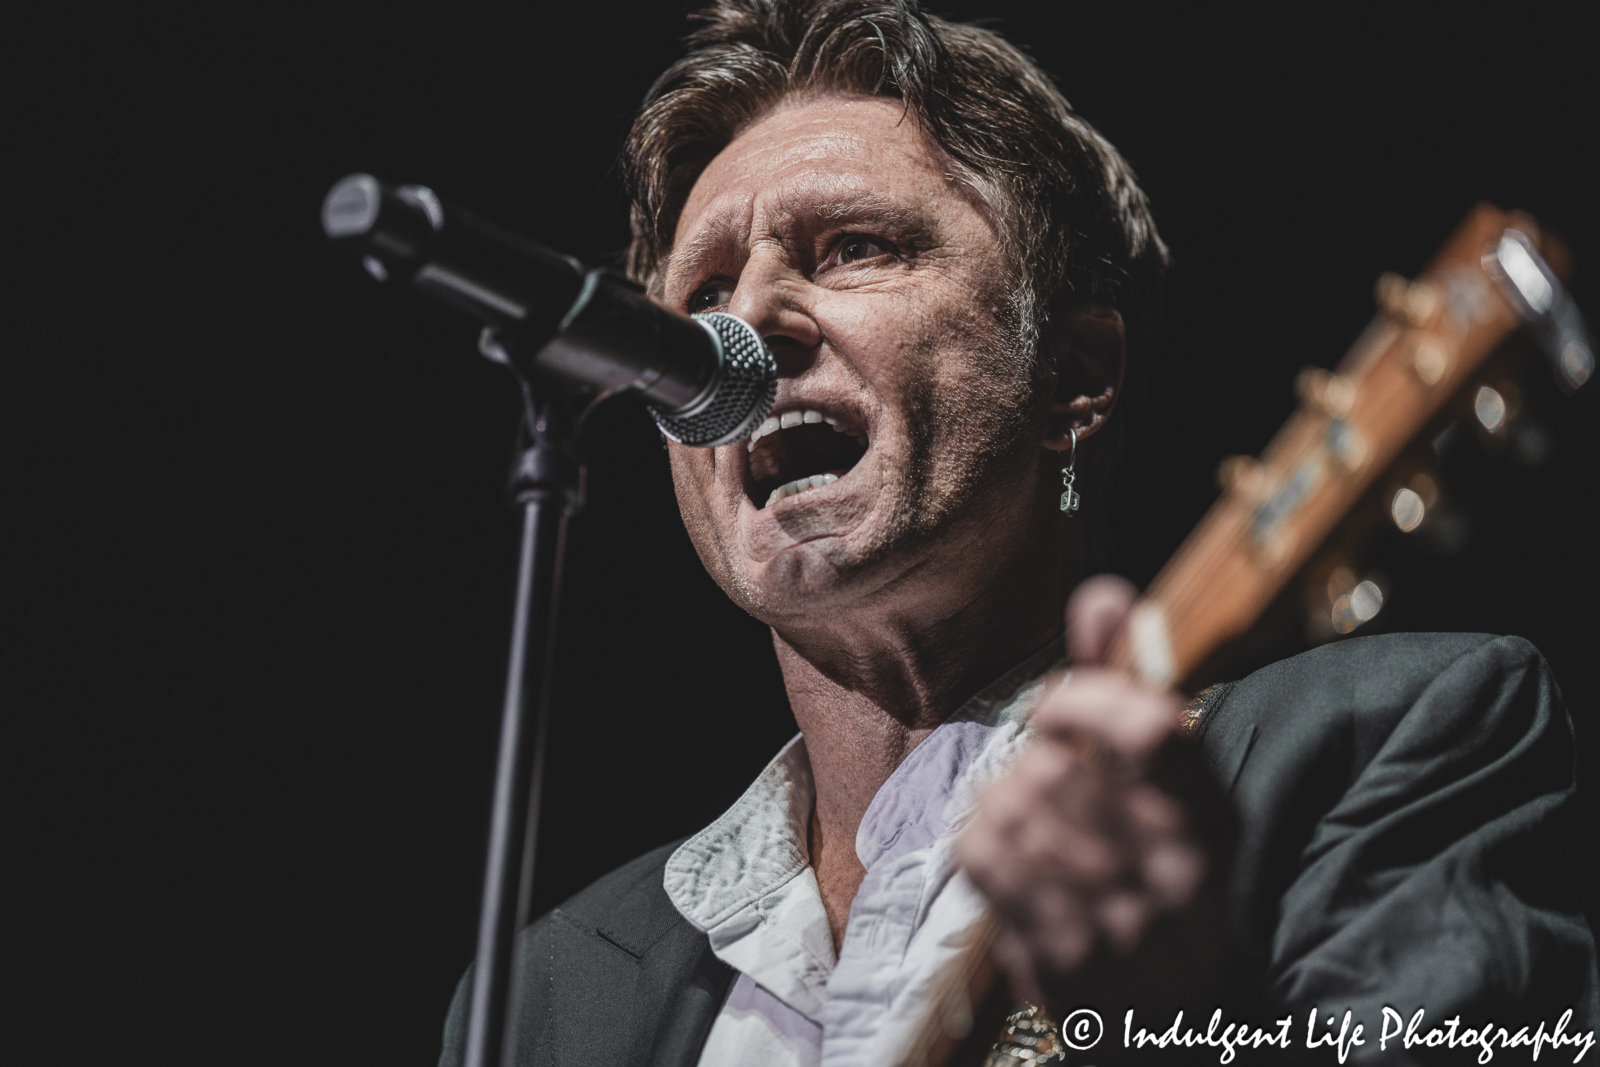 John Waite singing "Best of What I Got" by Bad English during his "Missing You" 40th Anniversary concert at Star Pavilion inside of Ameristar Casino in Kansas City, MO on December 8, 2023.